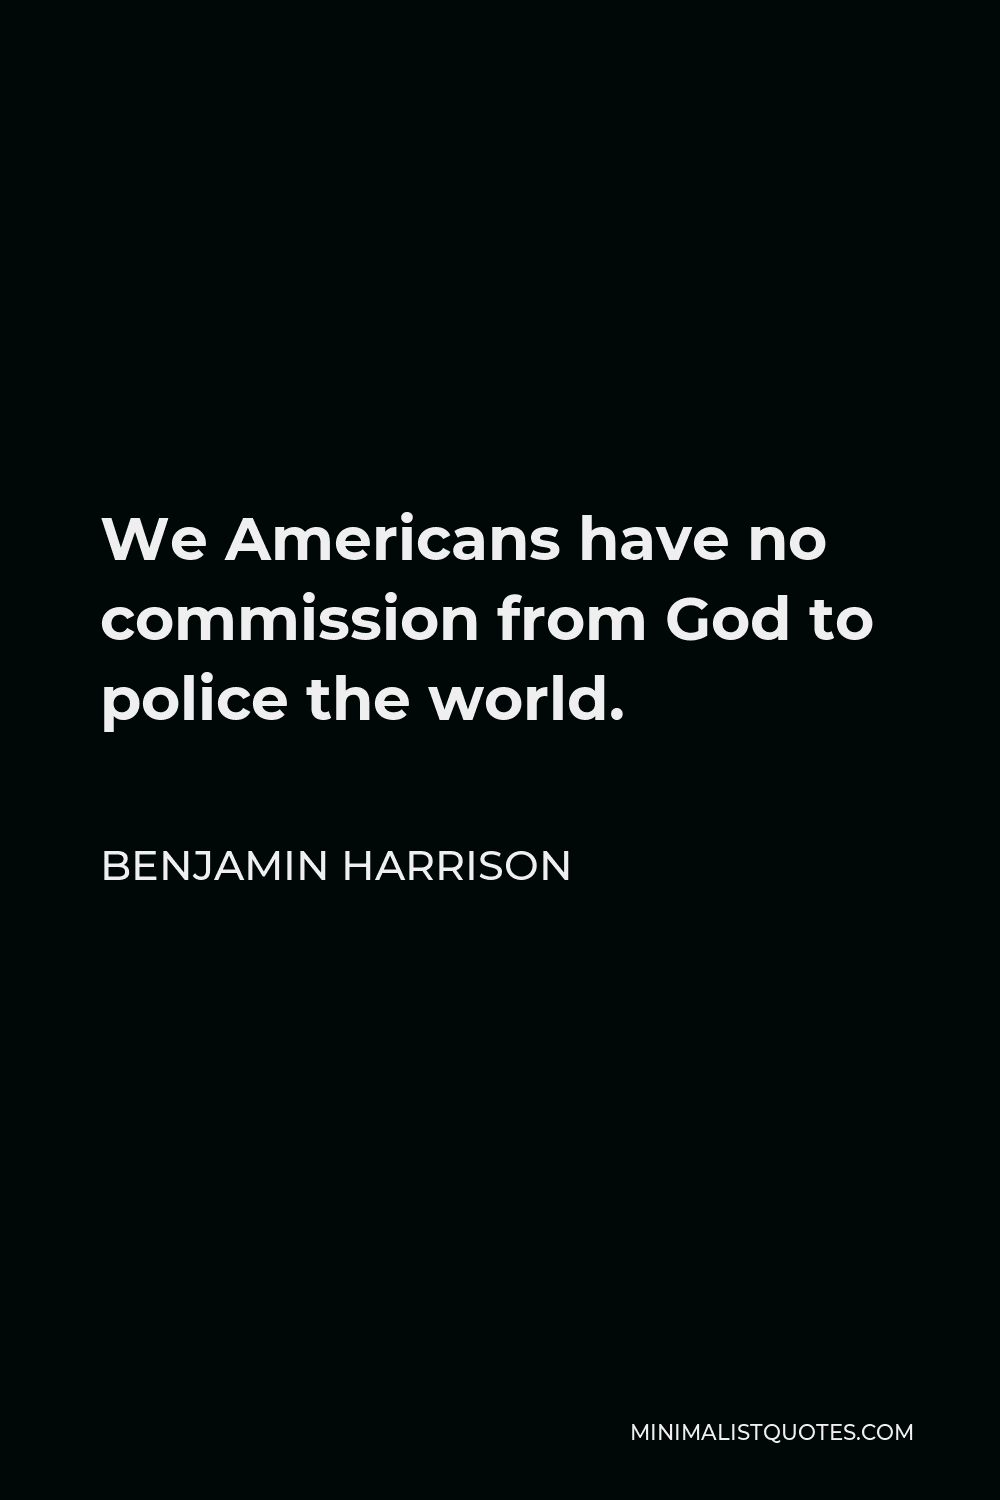 Benjamin Harrison Quote - We Americans have no commission from God to police the world.